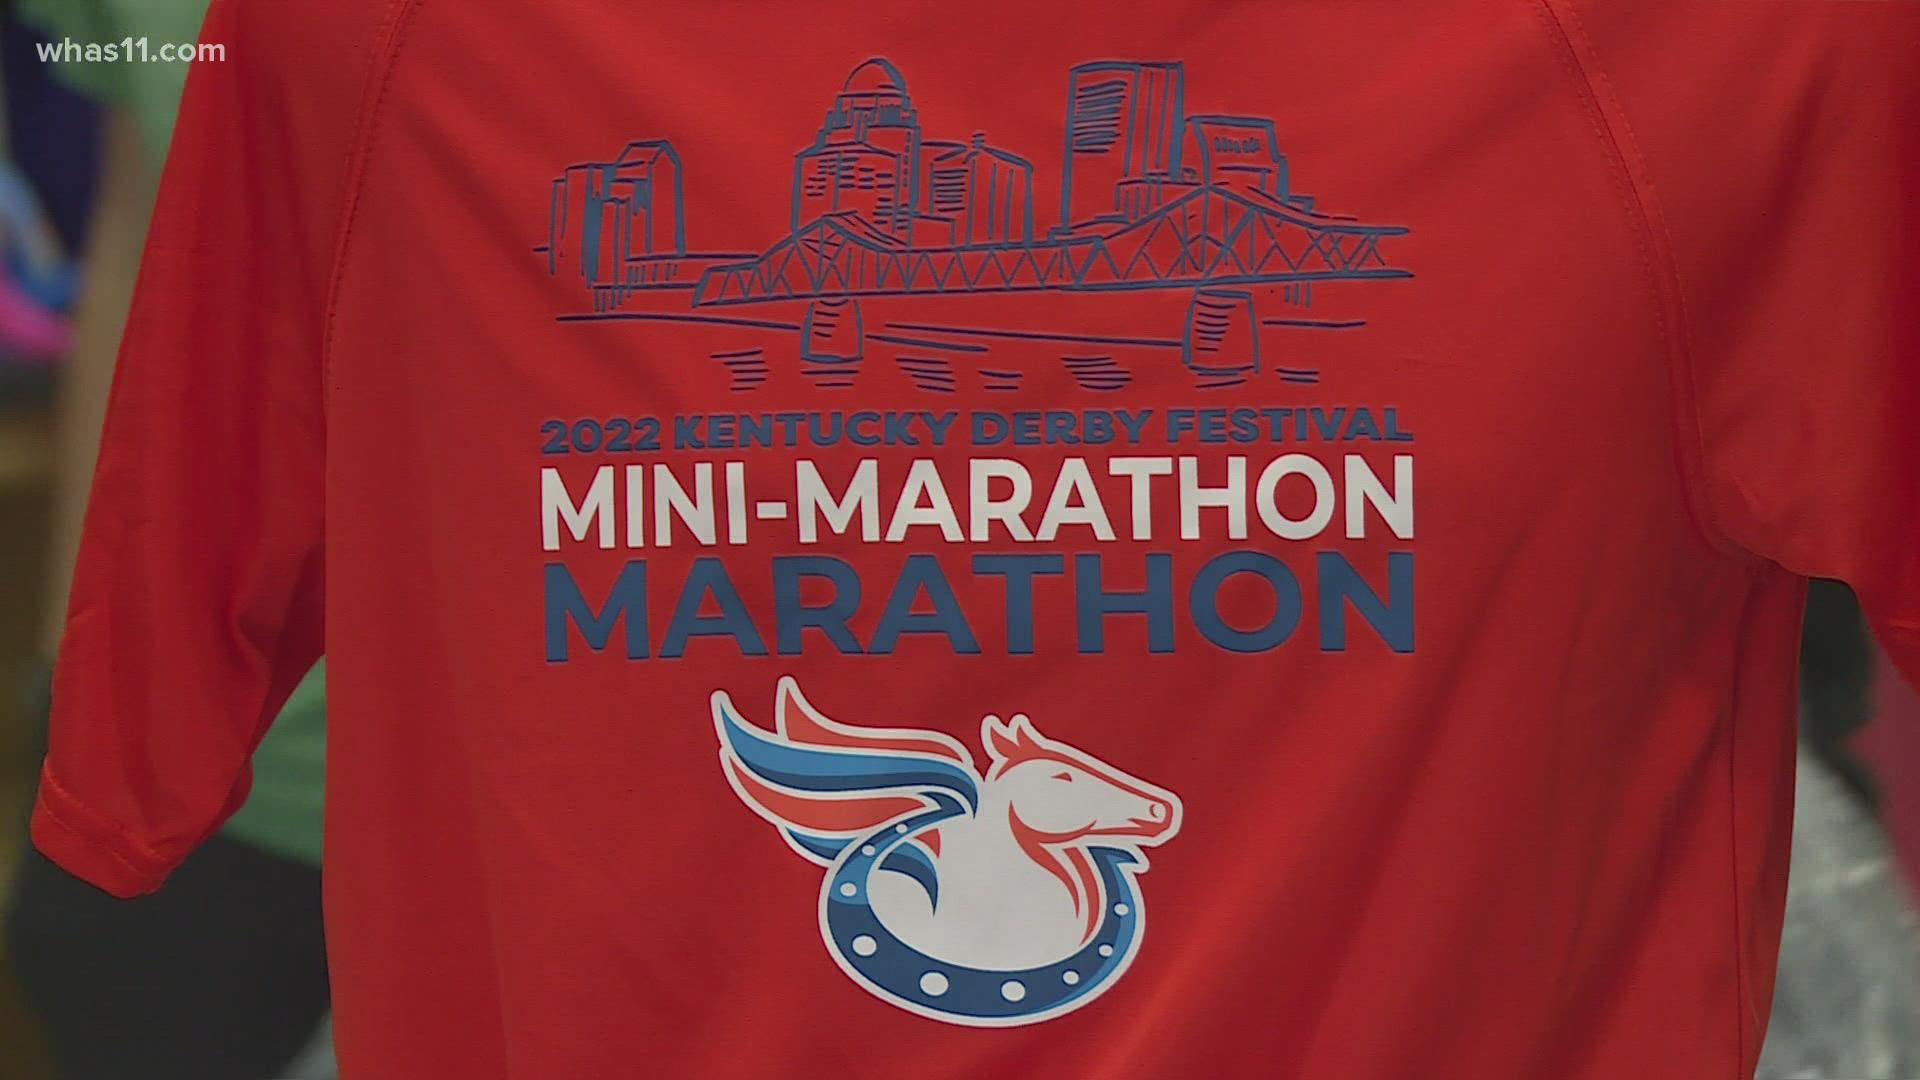 The mini and marathon as well as the Pegasus Parade are set for this weekend after two years of delays.